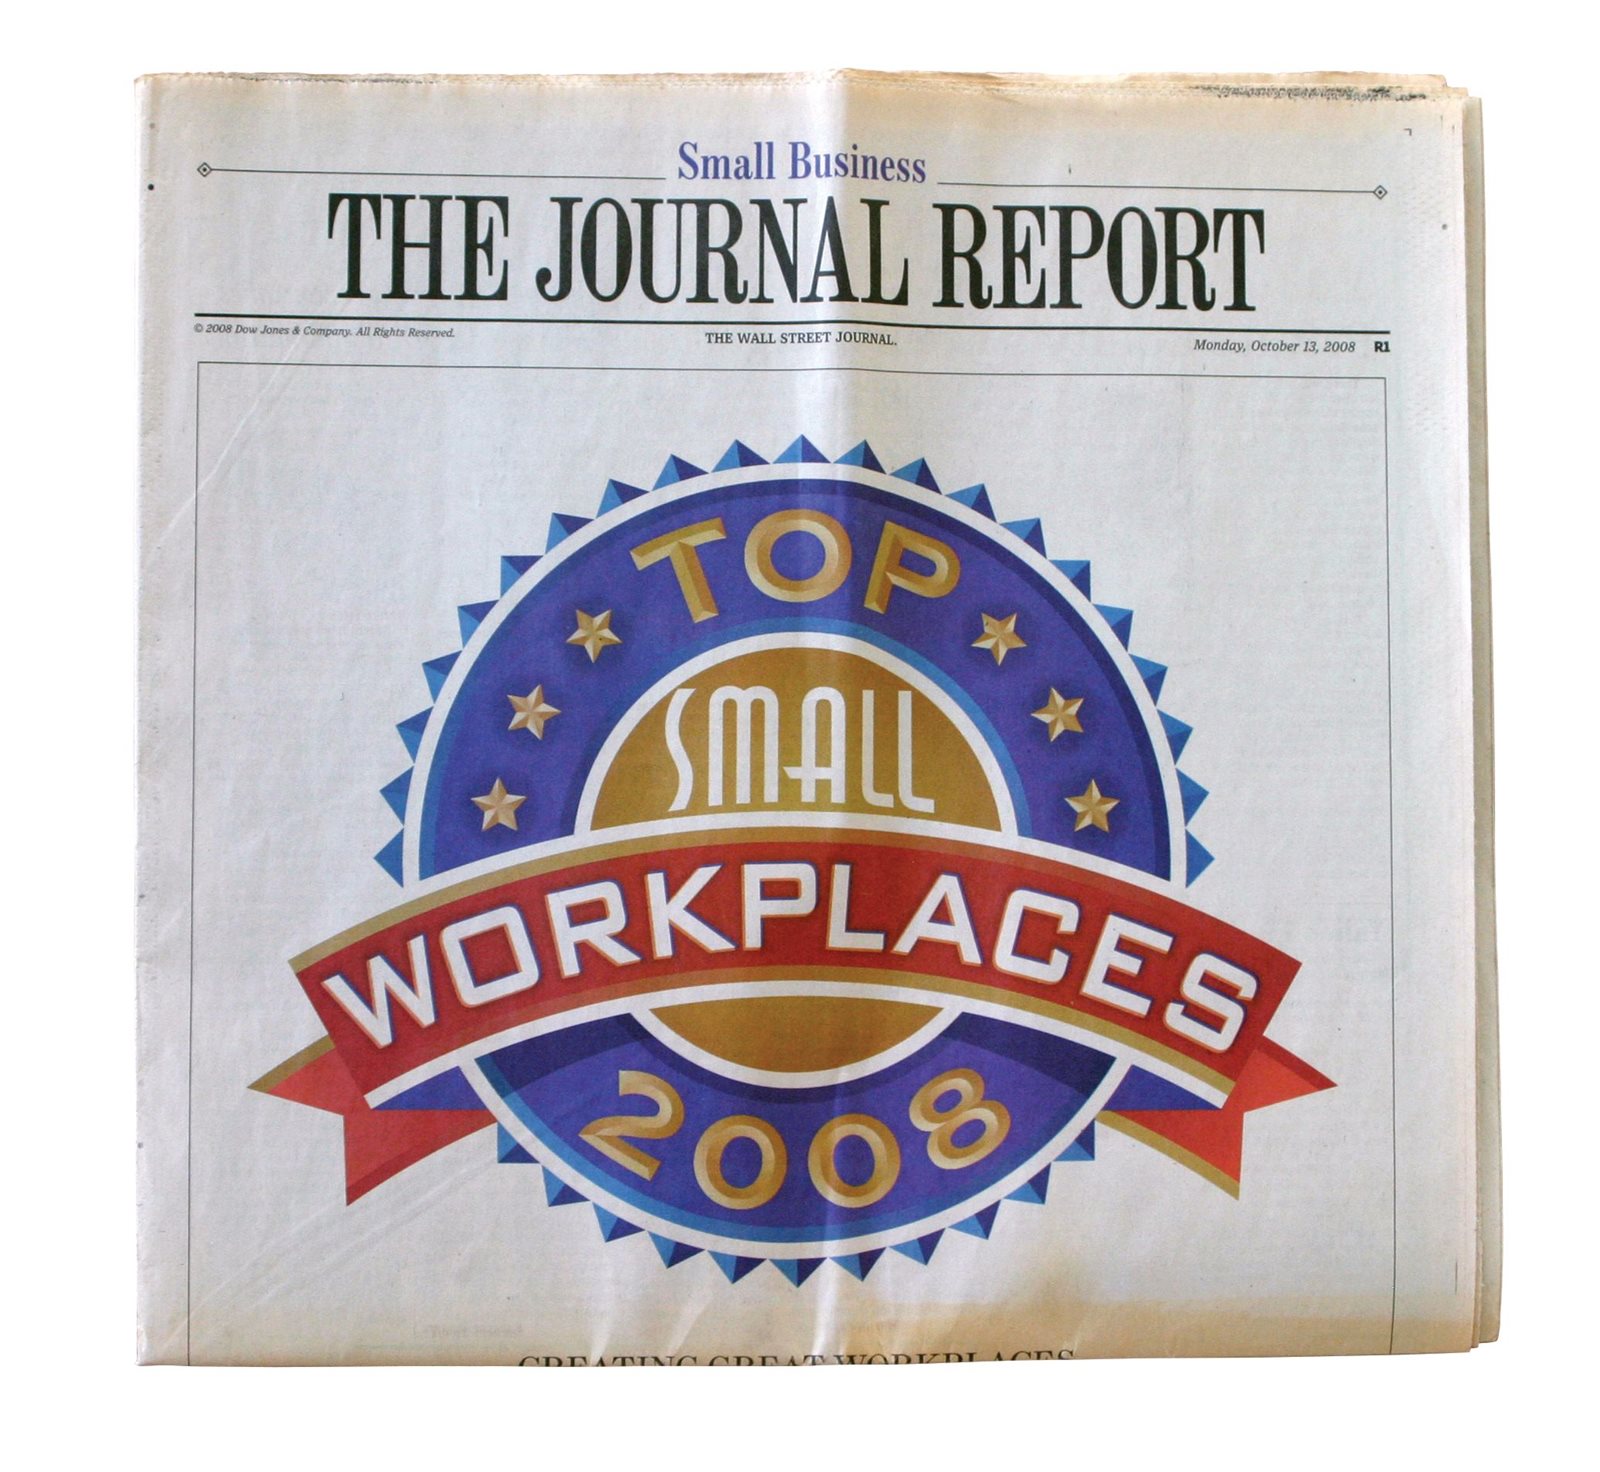 The Journal Report: Top Workplaces 2008